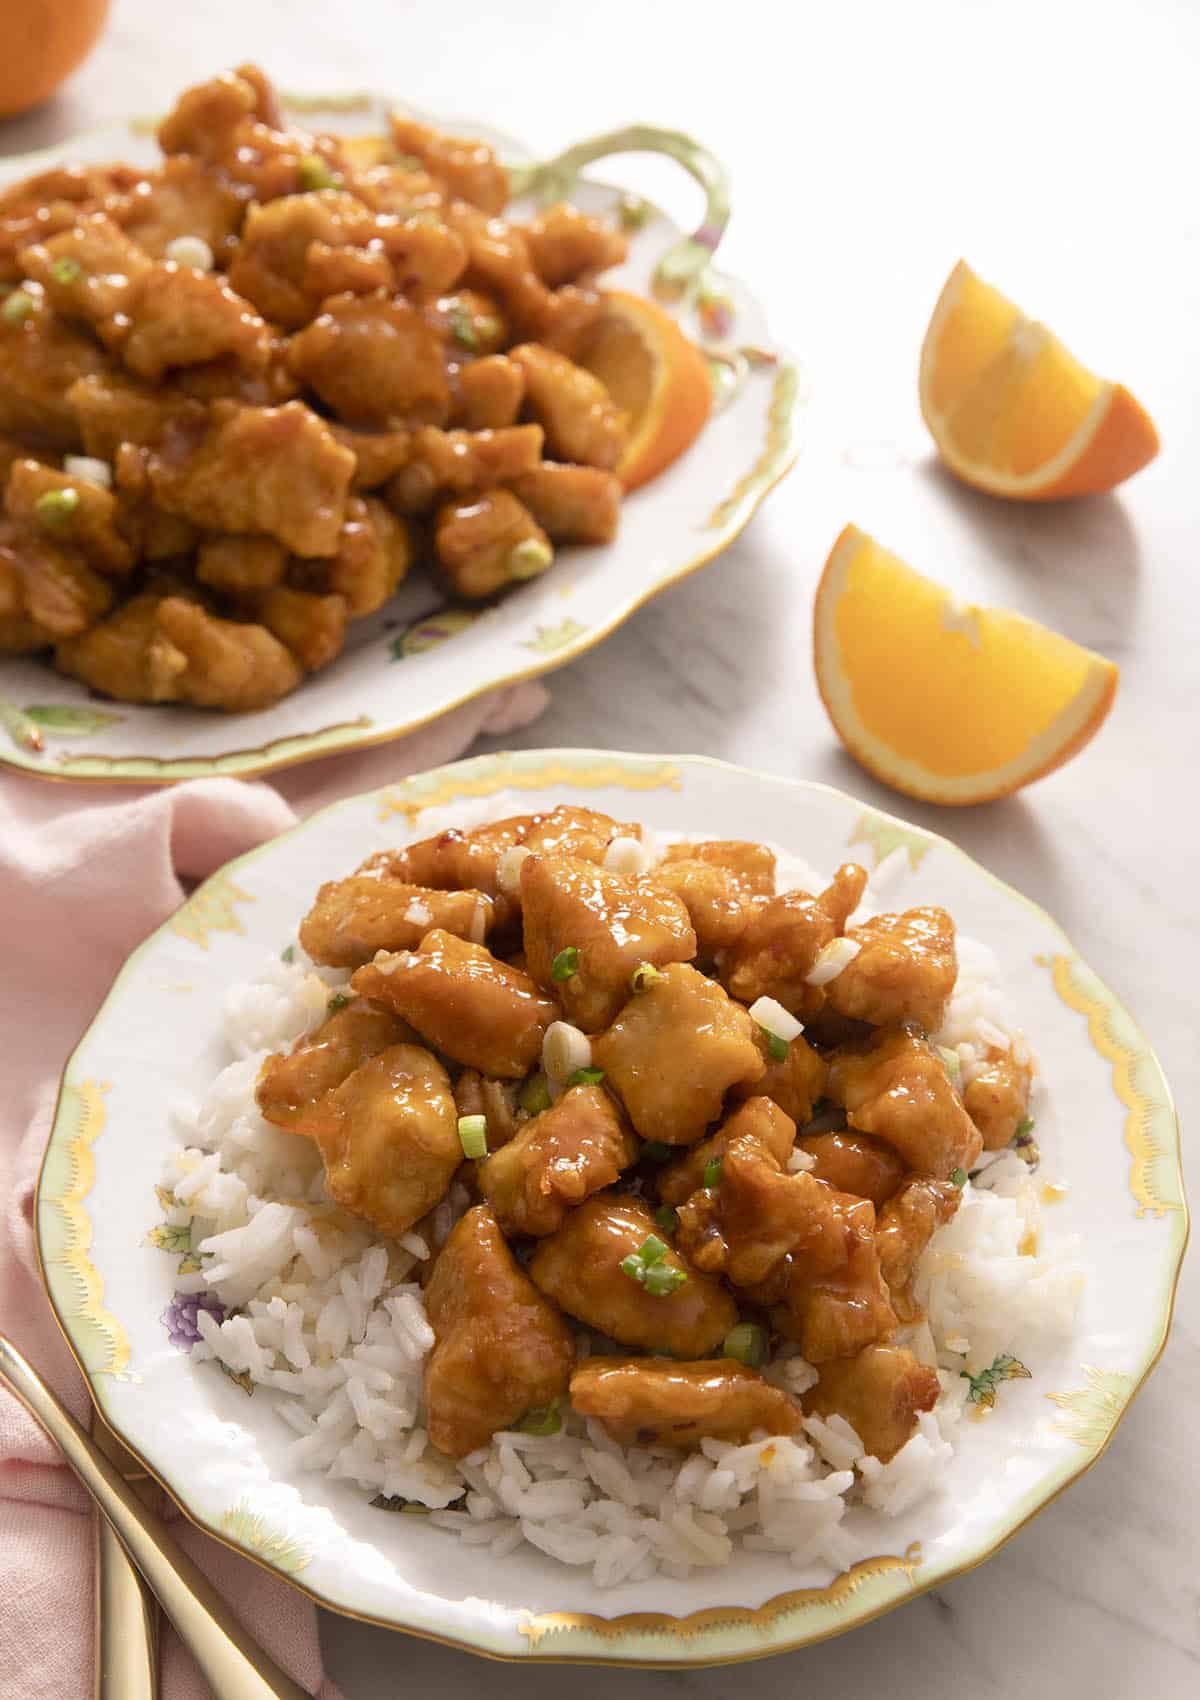 Rice and orange chicken on a plate with orange wedges in the background